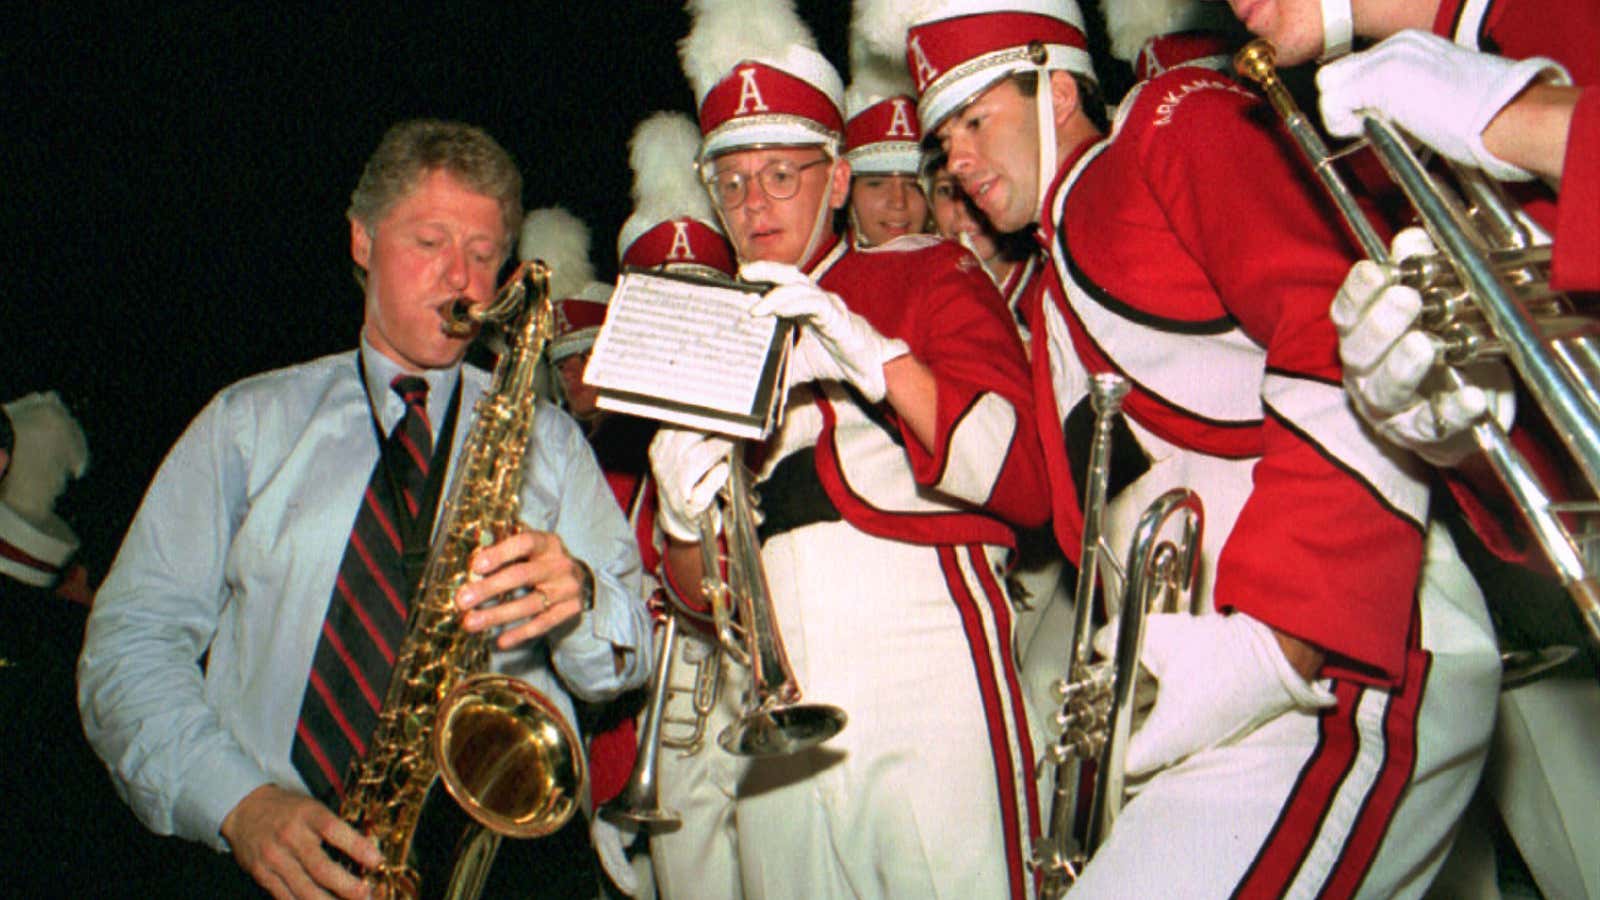 Bill Clinton, taking matters into his own hands.